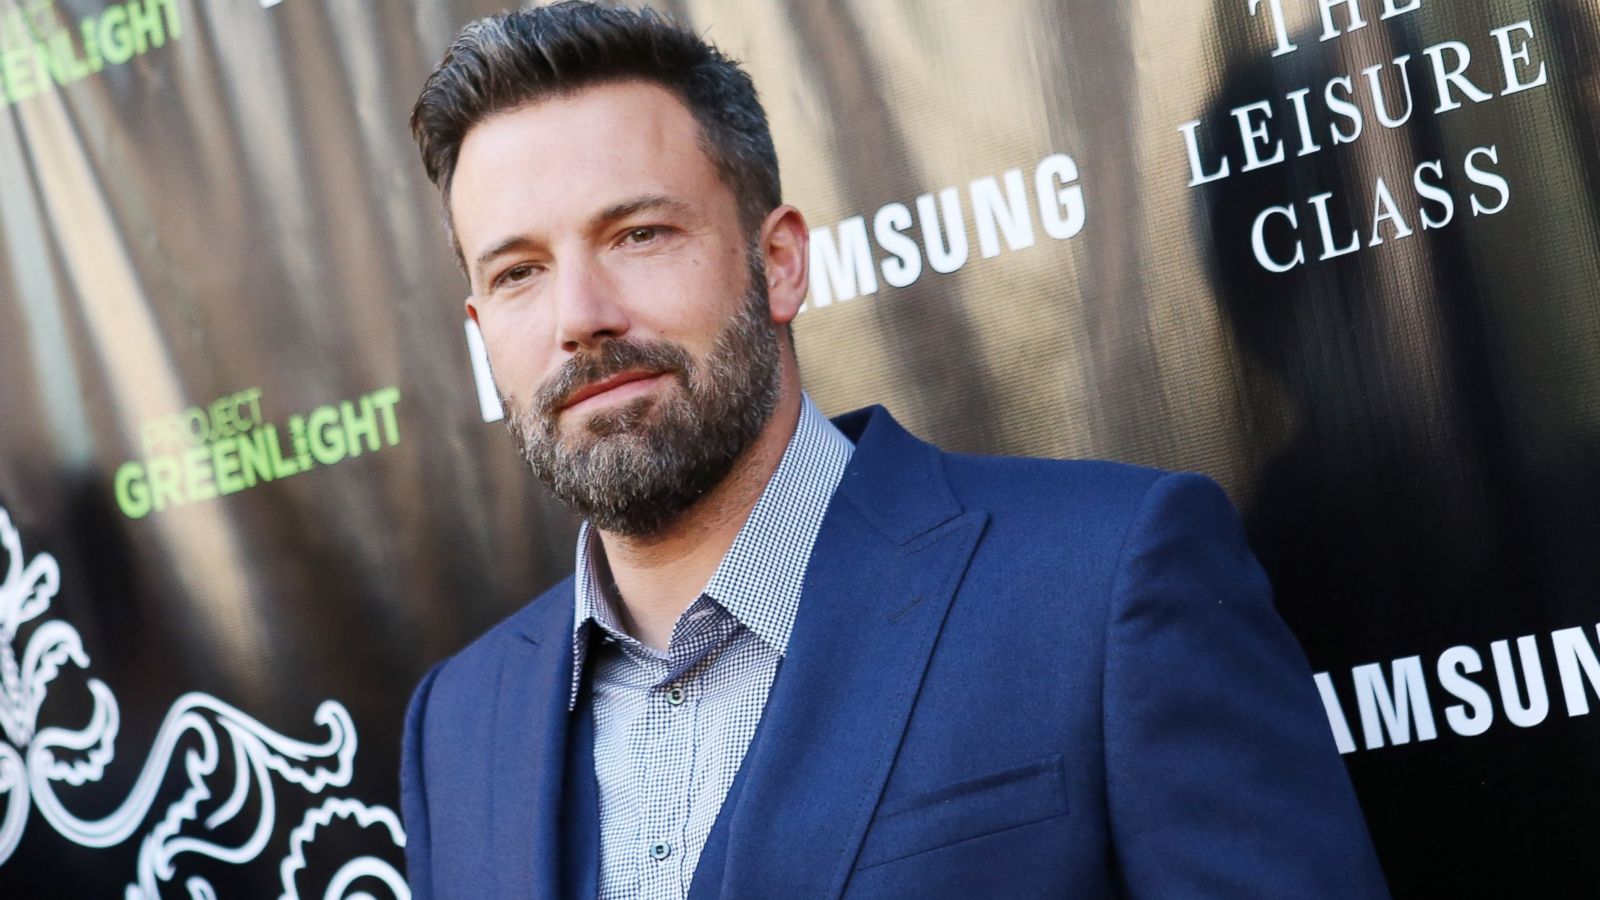 Ben Afflecks Massive Back Tattoo Is Actually Real Puts Ink on Full  Display in Shirtless Photos  Ben Affleck Shirtless  Just Jared  Celebrity News and Gossip  Entertainment